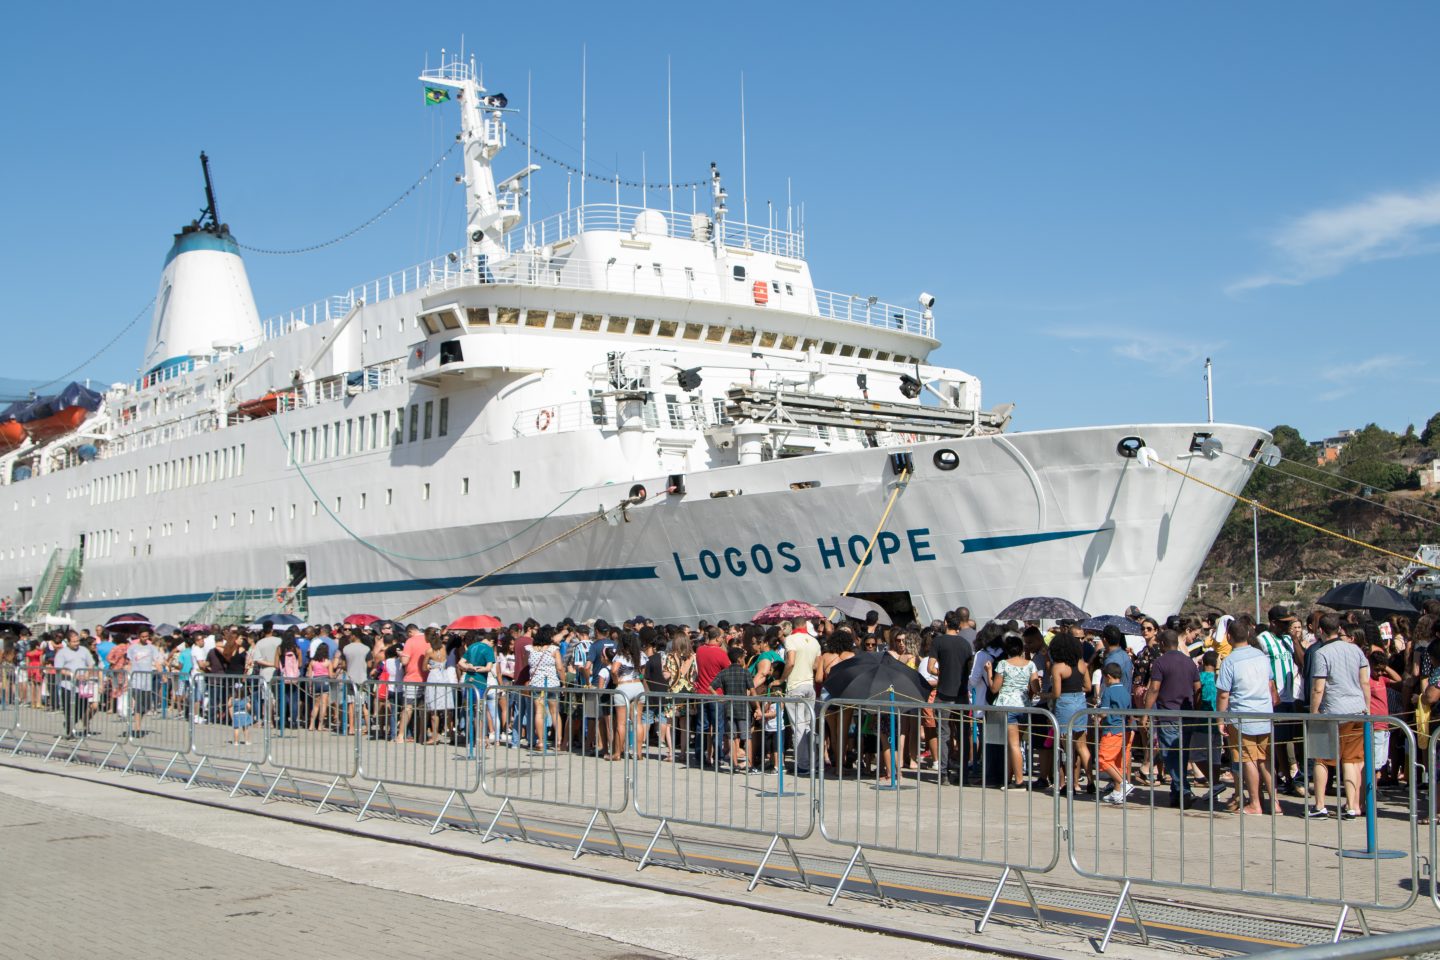 Visitors at Vitória, Brazil waiting on the quayside to enter the ship’s bookfair. Photo by Camille Patureau (OM Ships).